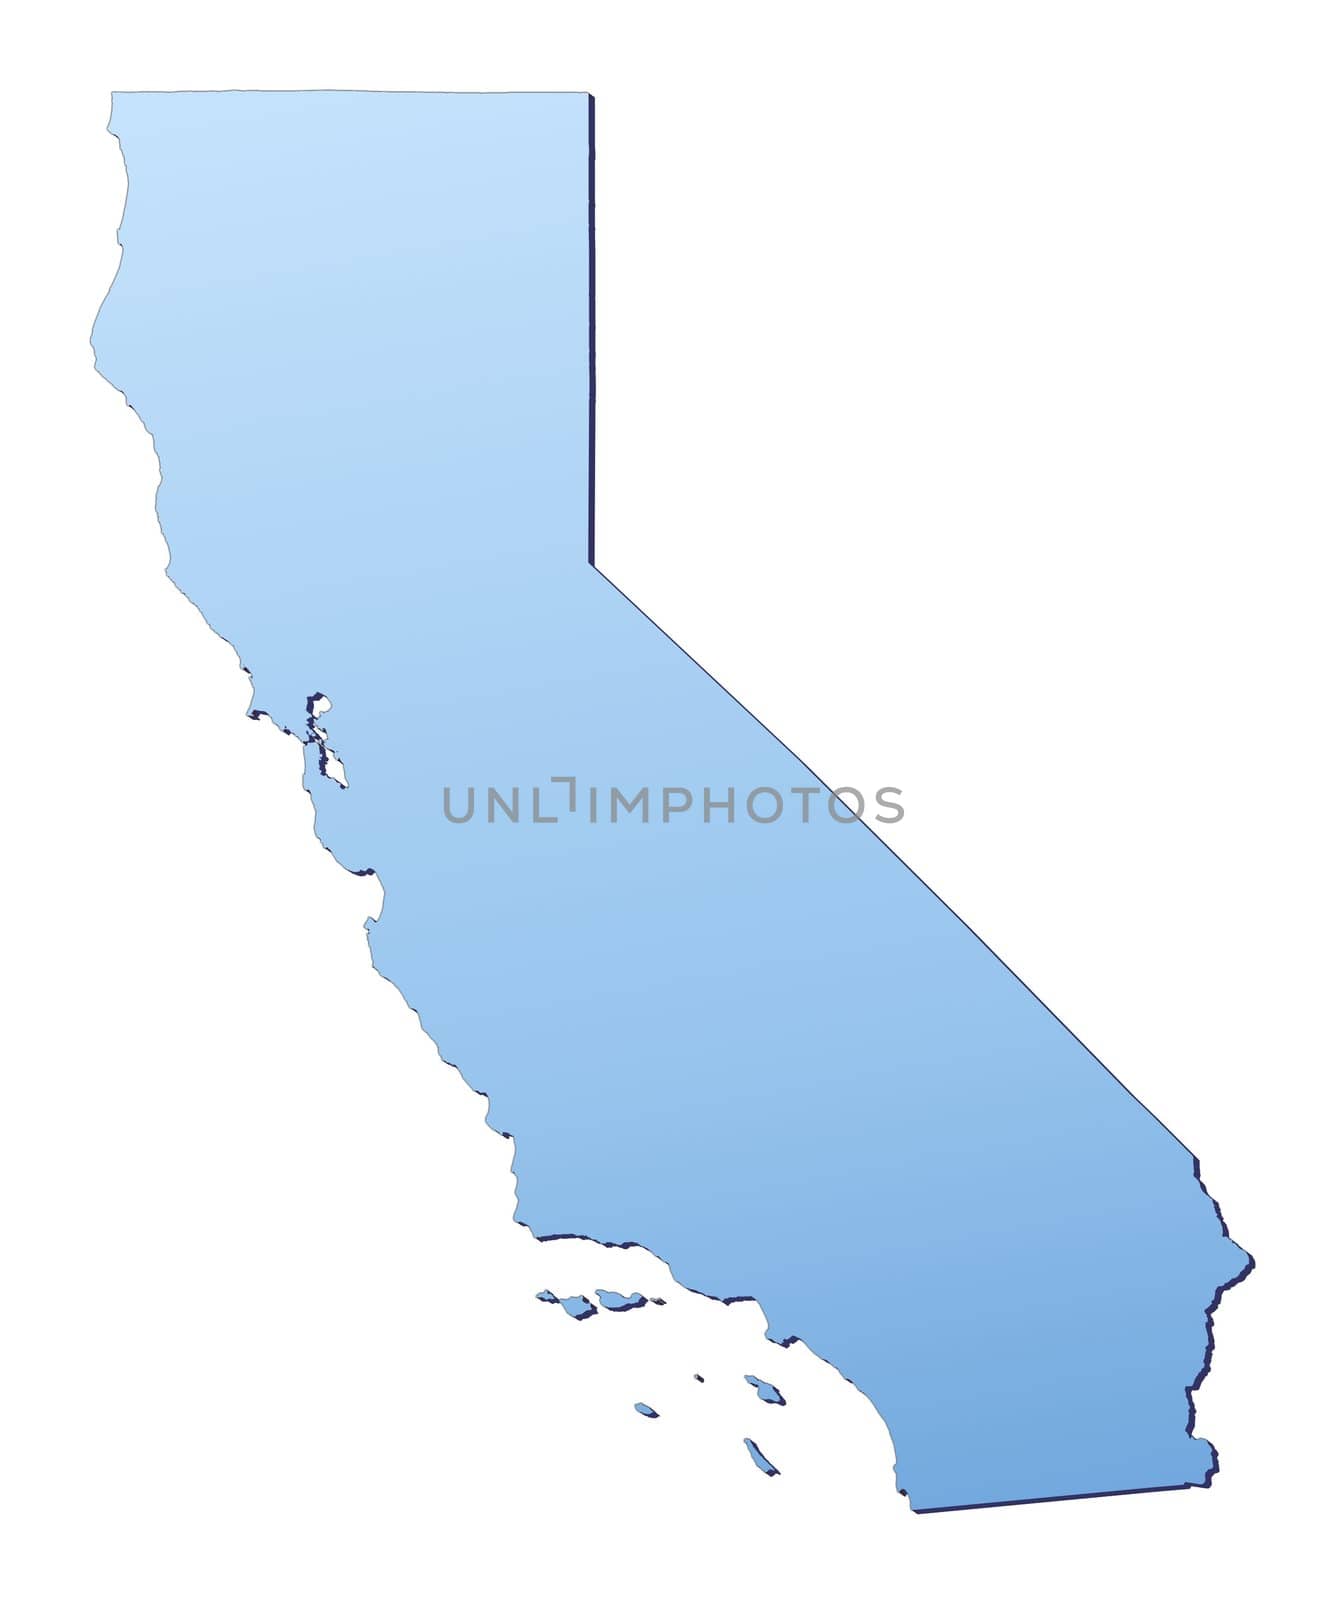 California(USA) map by skvoor